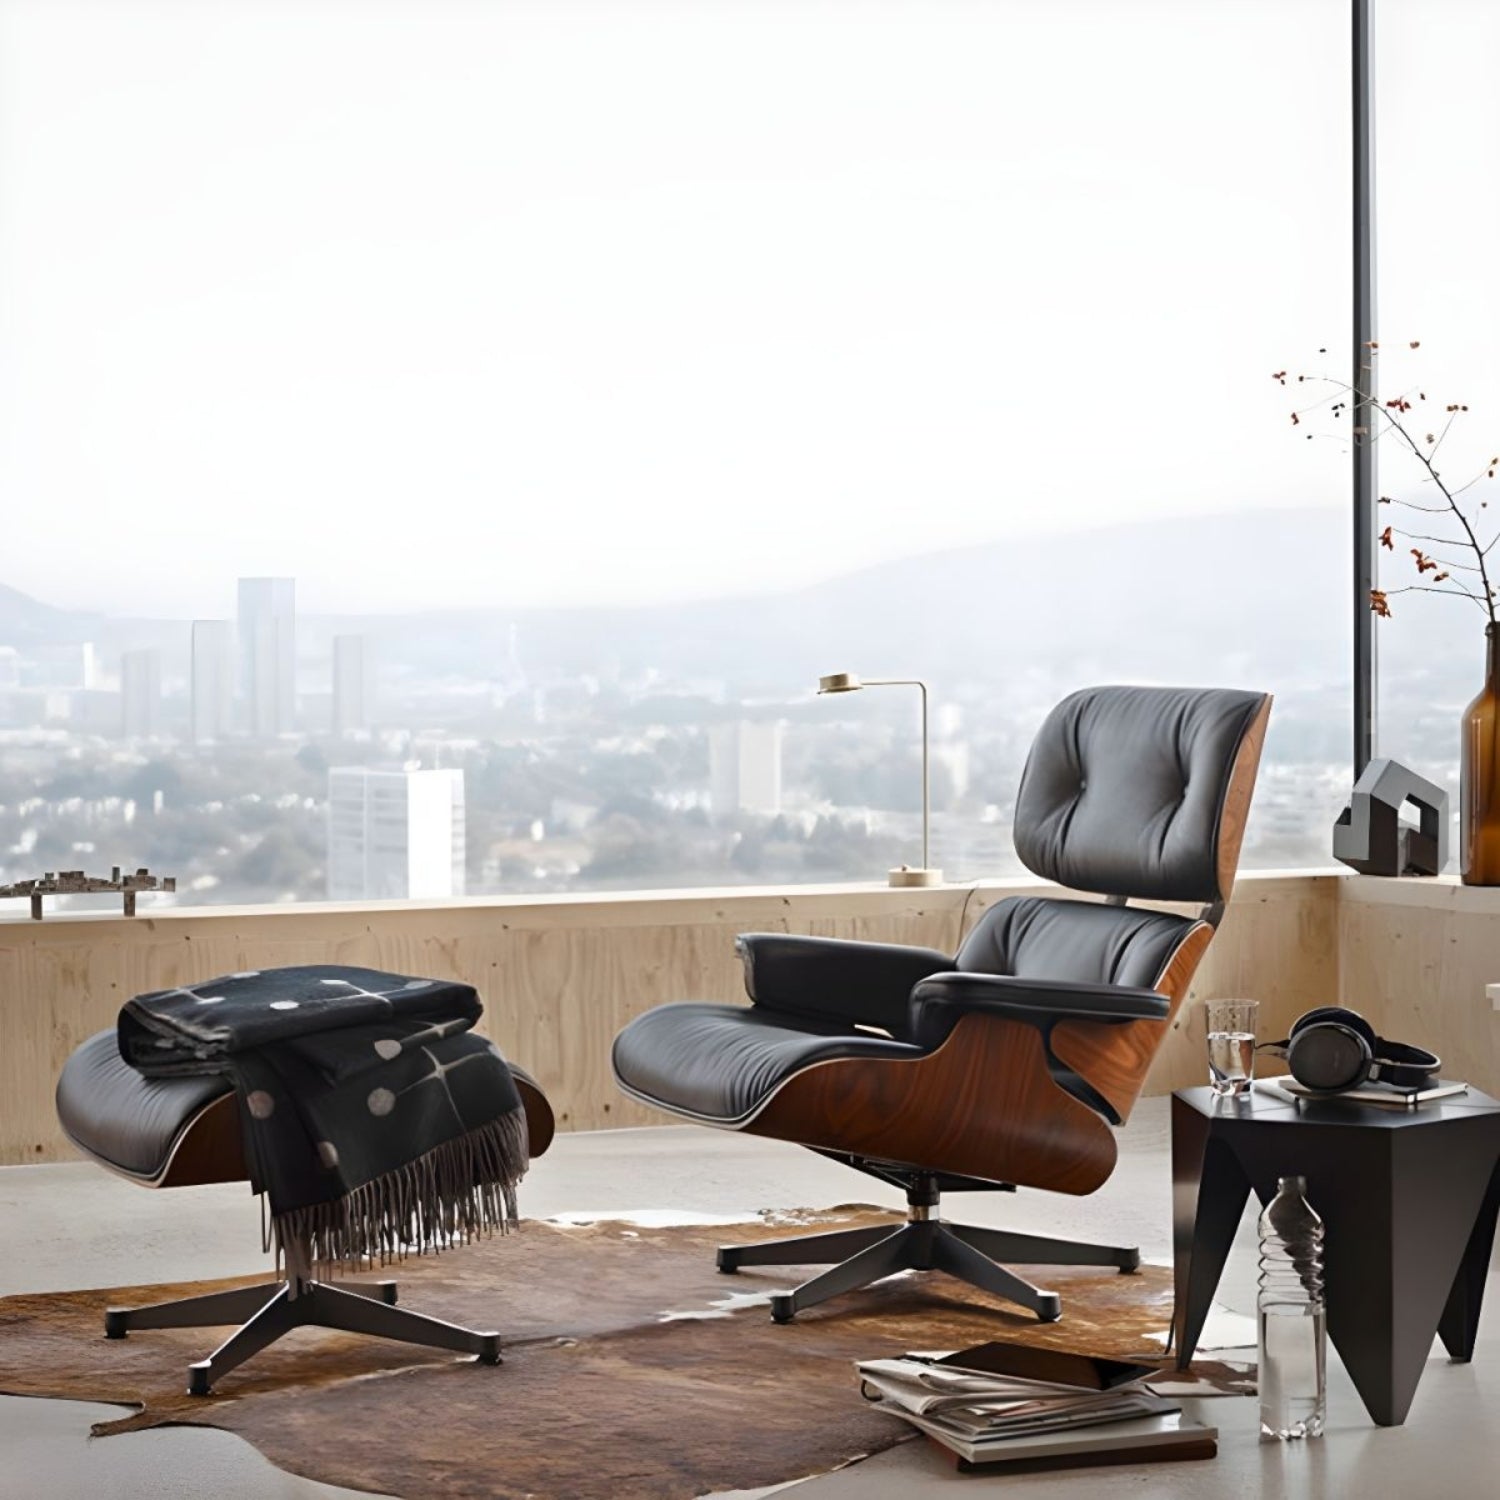 A stylish Eames lounge chair and ottoman positioned near a window, providing a serene spot to unwind.